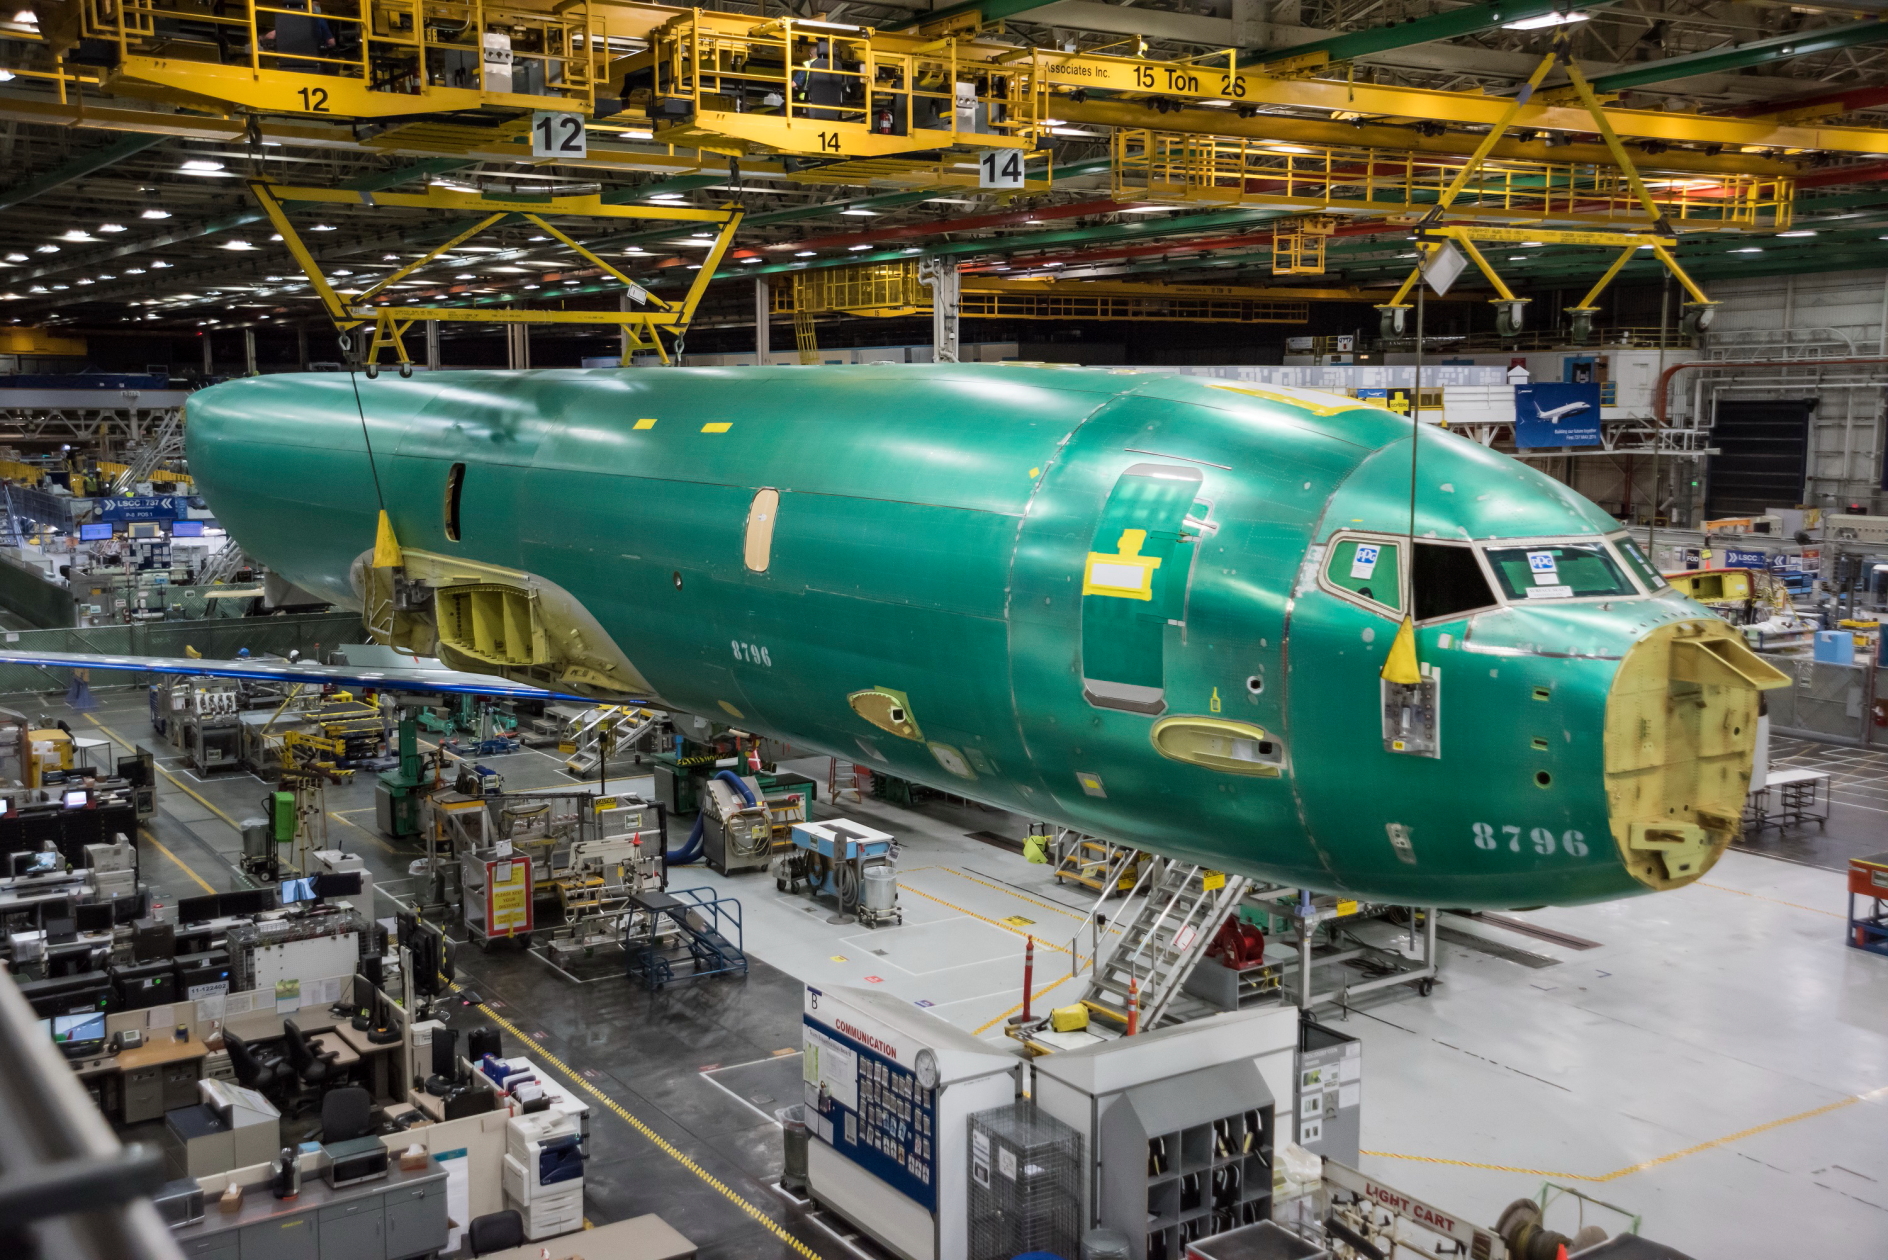 The first P-8A Poseidon fuselage for Norway arrived at Boeing facilities in Renton, Washington, from Spirit AeroSystems in Wichita, Kansas, on Monday. The delivery marks a major milestone in the production of the first of five Poseidons for the Royal Norwegian Air Force (Luftforsvaret). Click to enlarge.